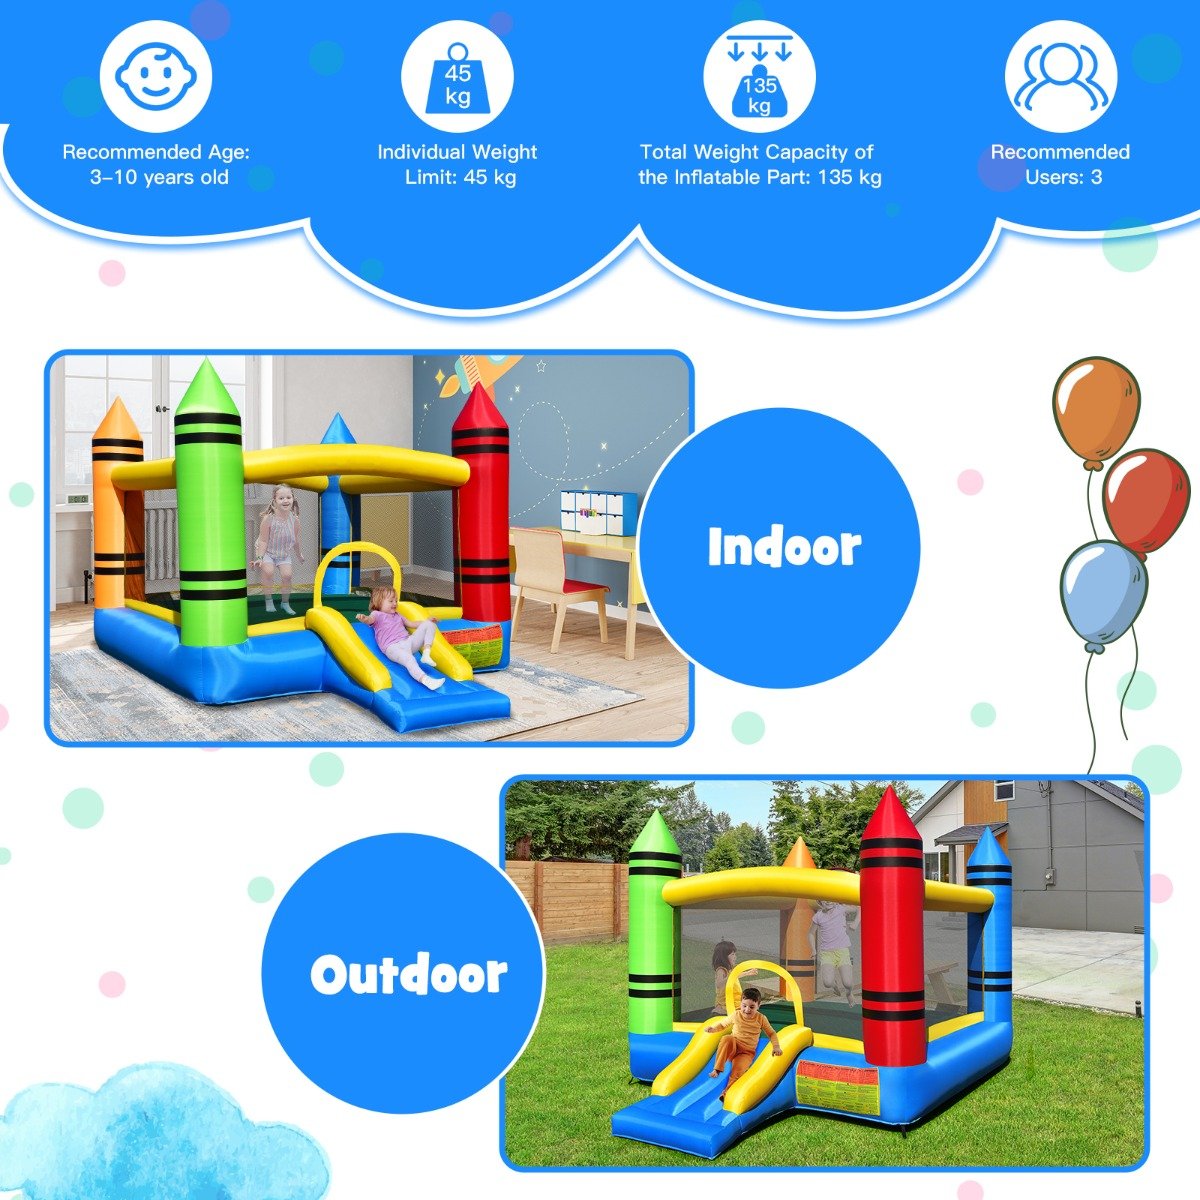 Active Adventure: Inflatable Bounce House with Slide for Kids Outdoor Fun